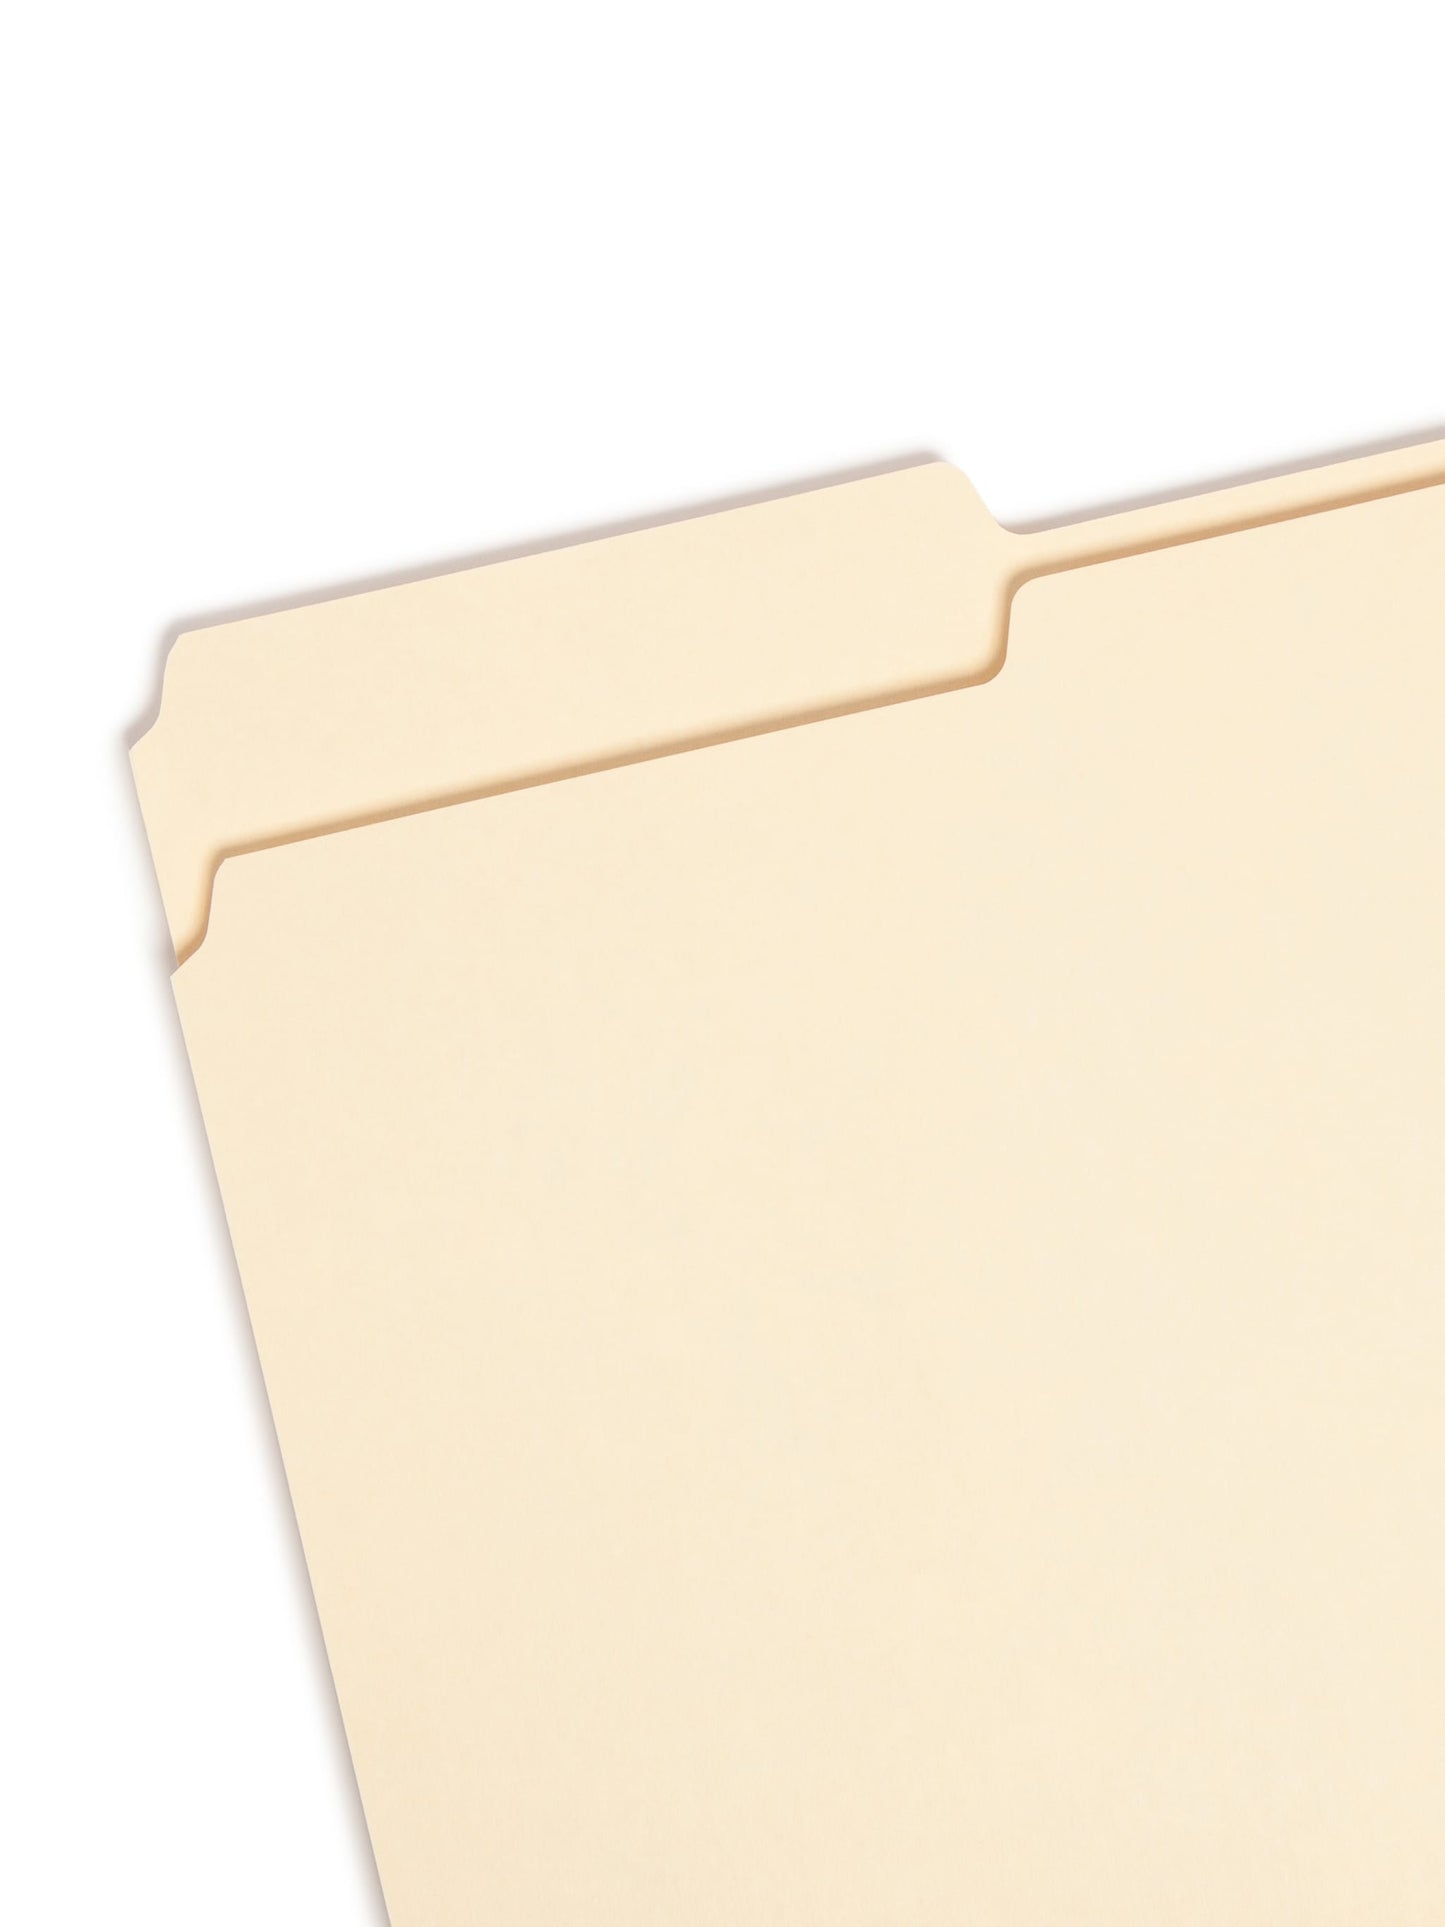 100% Recycled File Folders, Manila Color, Legal Size, Set of 100, 086486153393